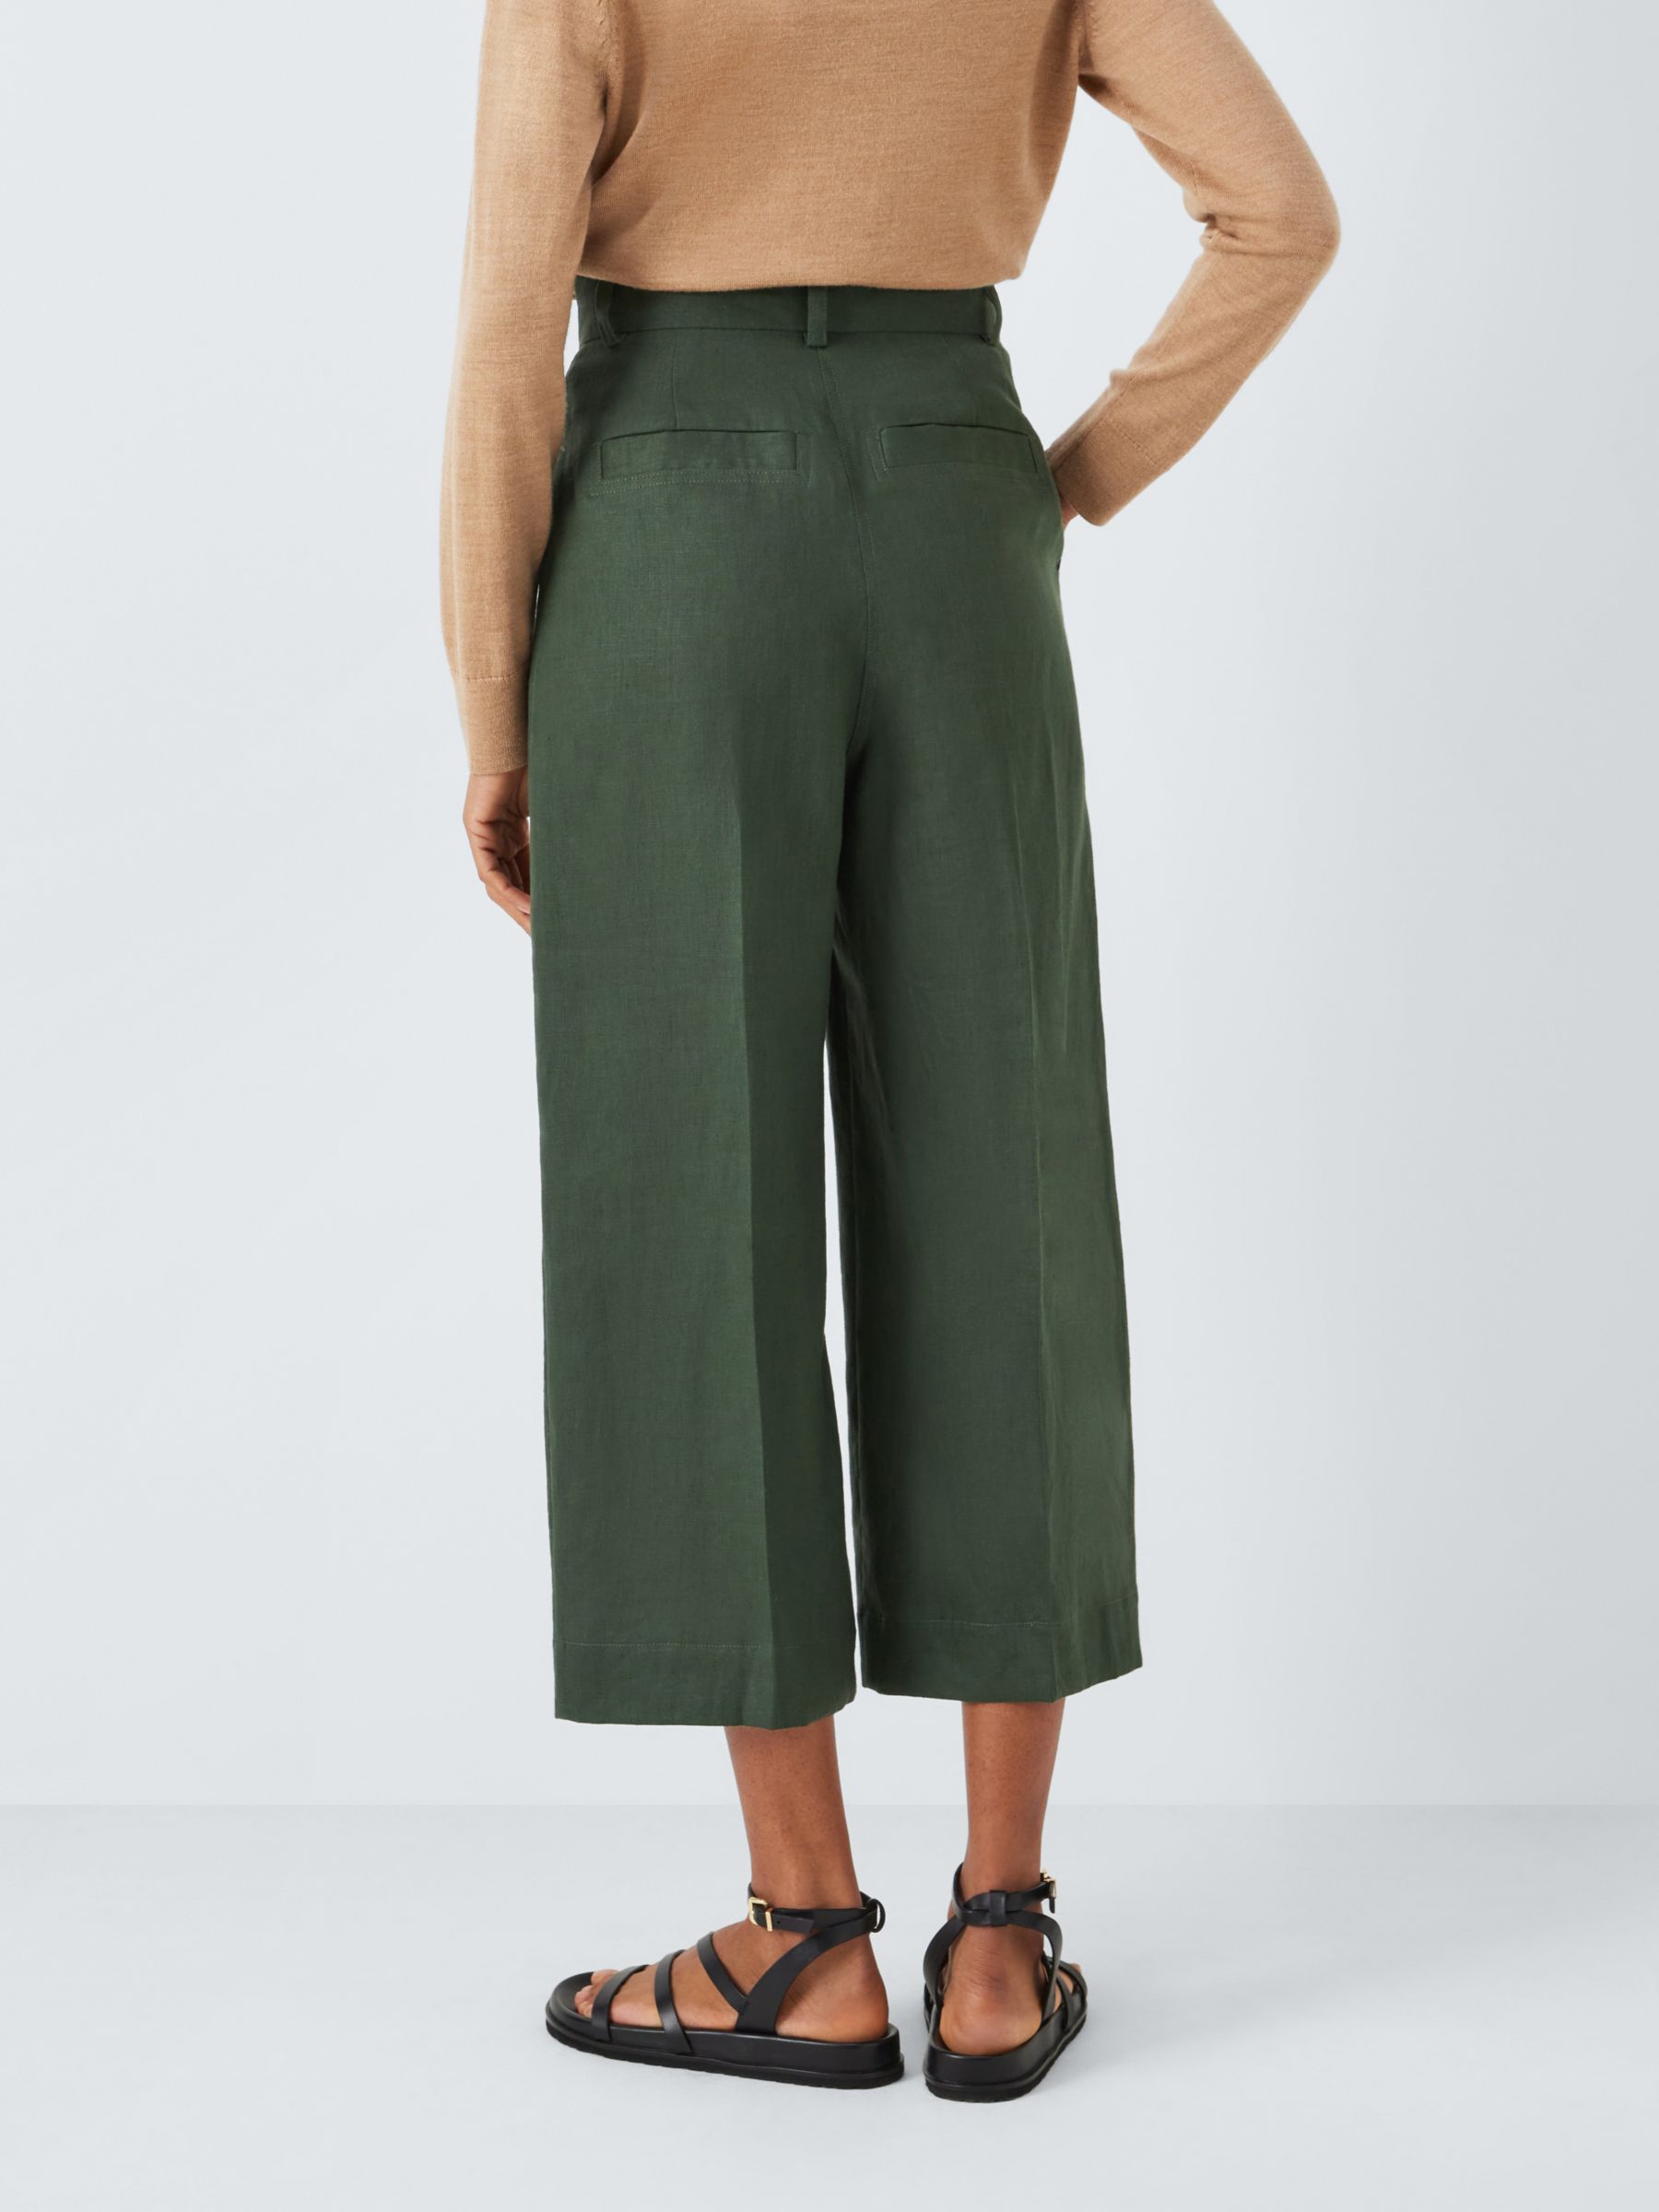 John Lewis Cropped Linen Trousers, Forest Green at John Lewis & Partners